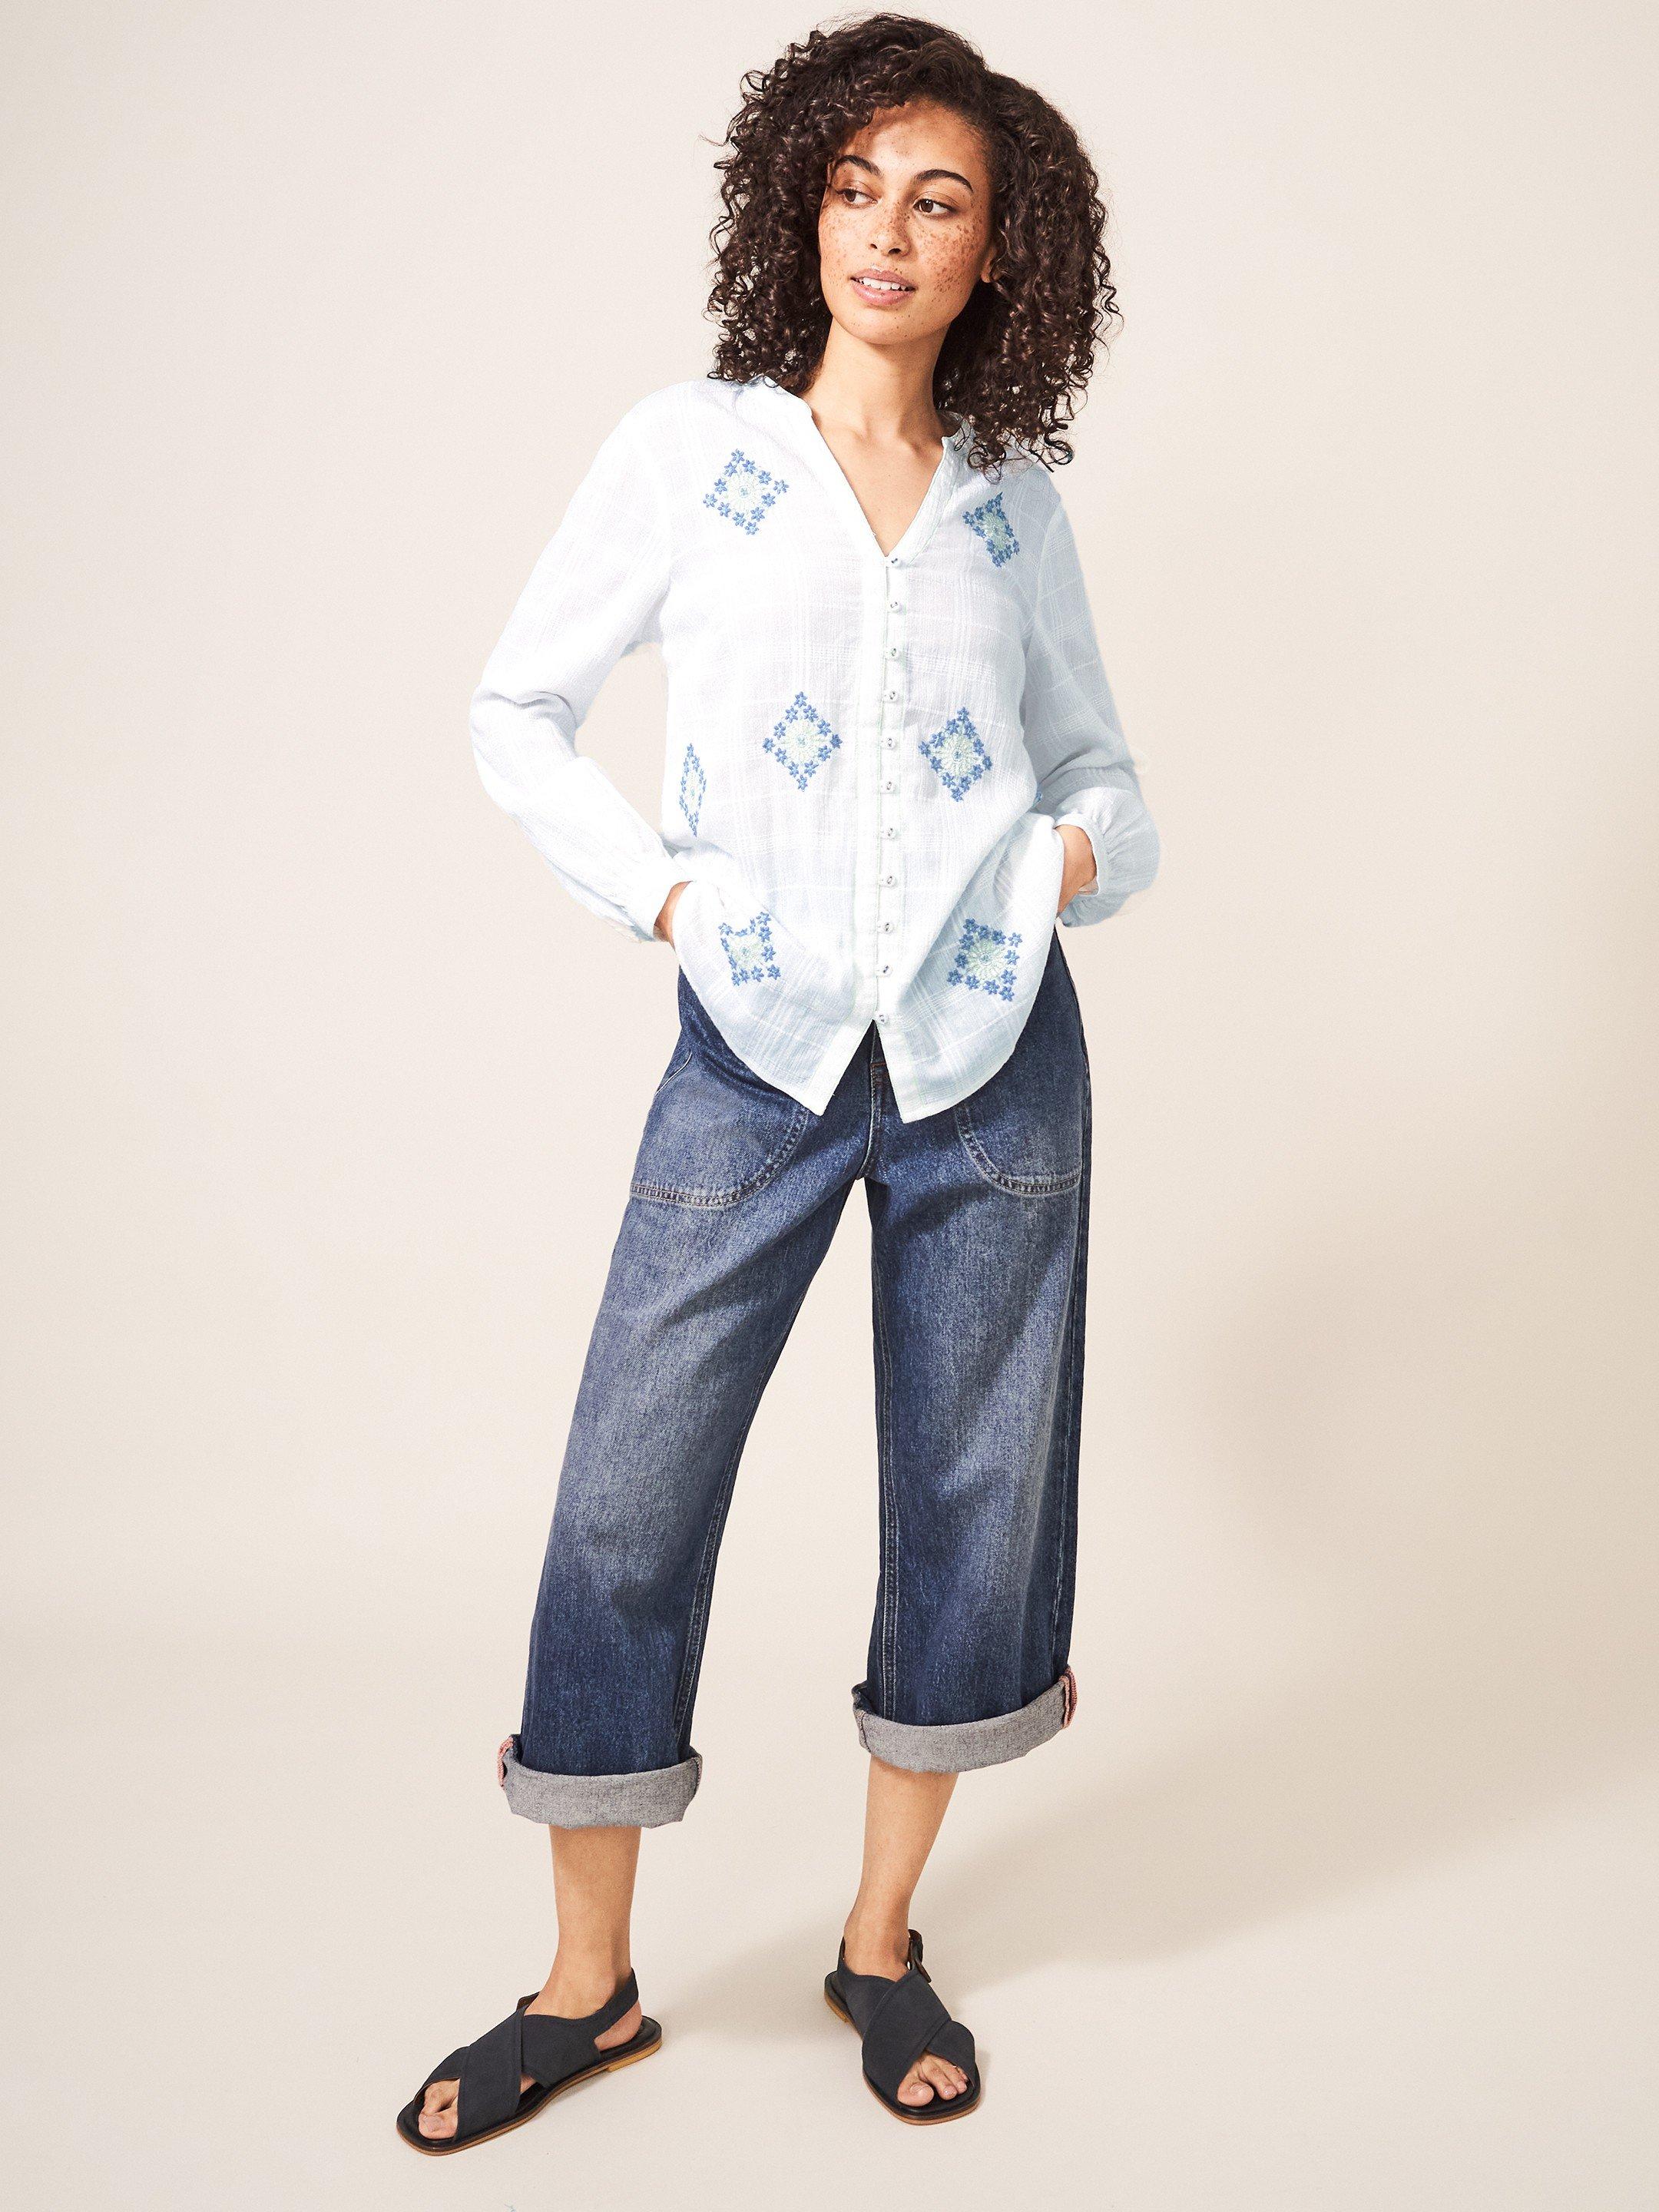 Kate Embroidered Shirt in WHITE MLT - MODEL FRONT